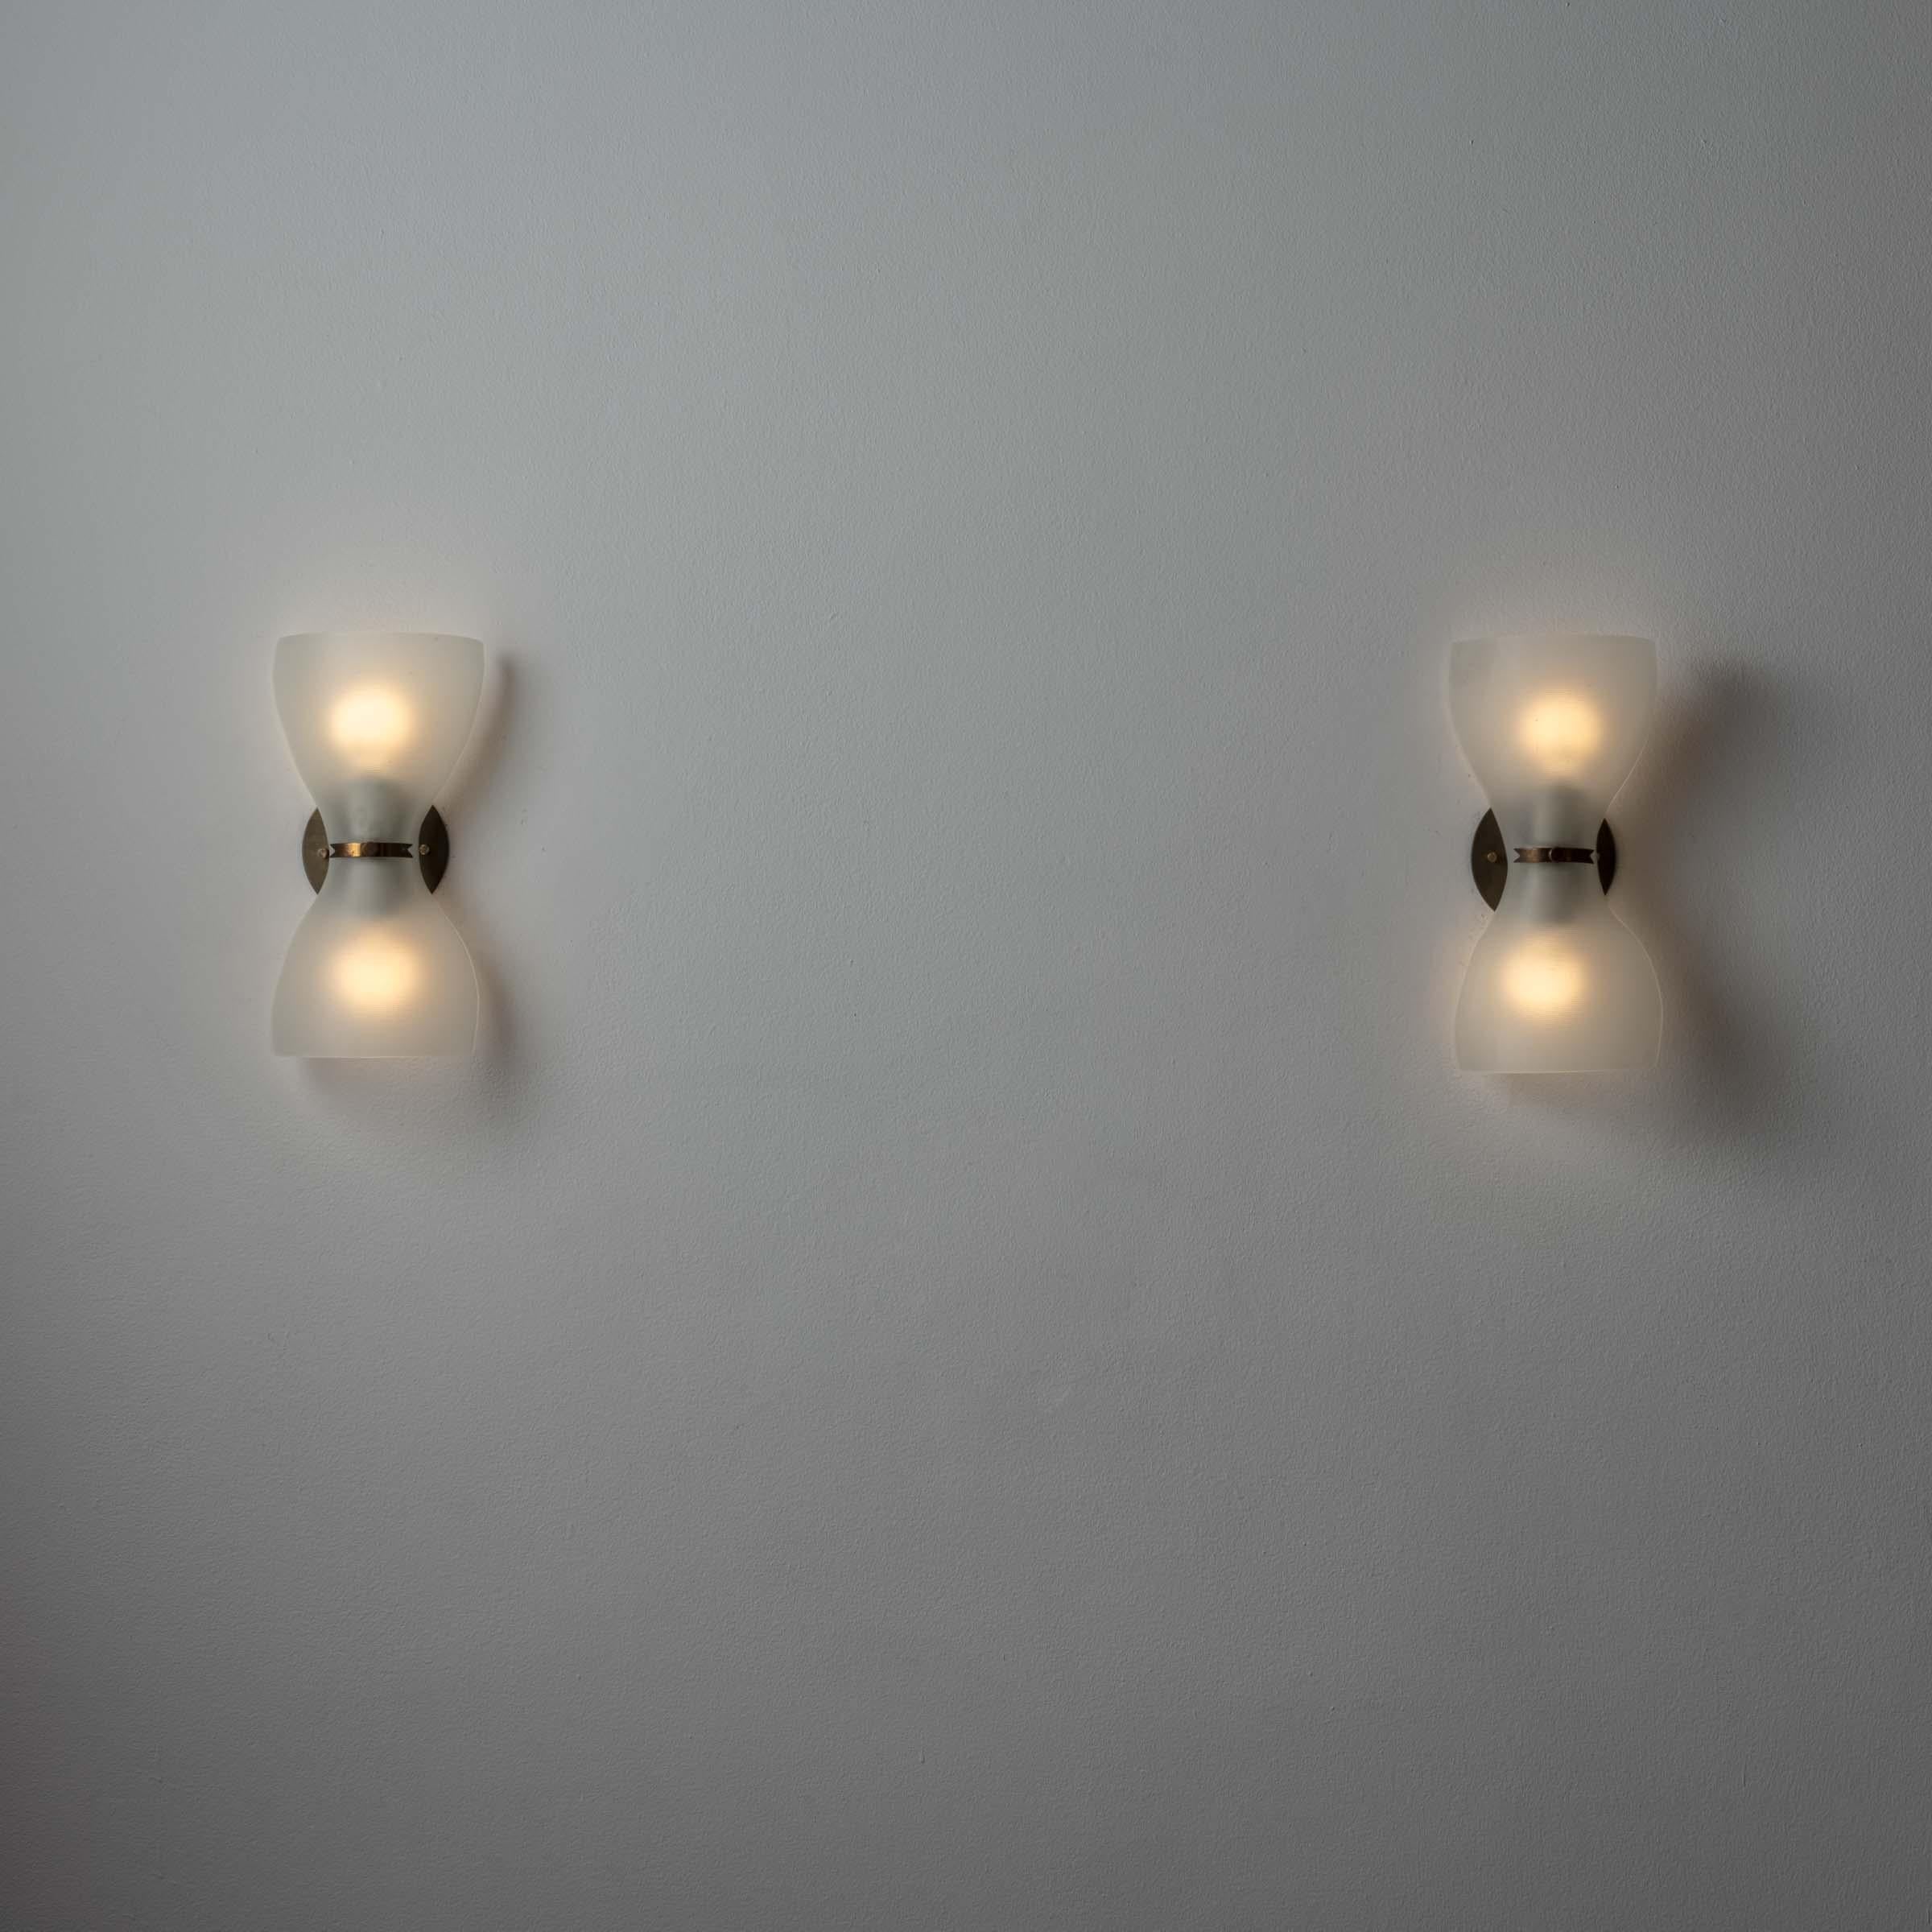 Pair of Sconces by Pietro Chiesa for Fontana Arte. Designed and manufactured in Italy, circa 1940's. Opaline glass, brass. Custom brass backplates. Wired for U.S. standards. We recommend two E14 candelabrab 25w maximum bulbs per sconce. Bulbs not